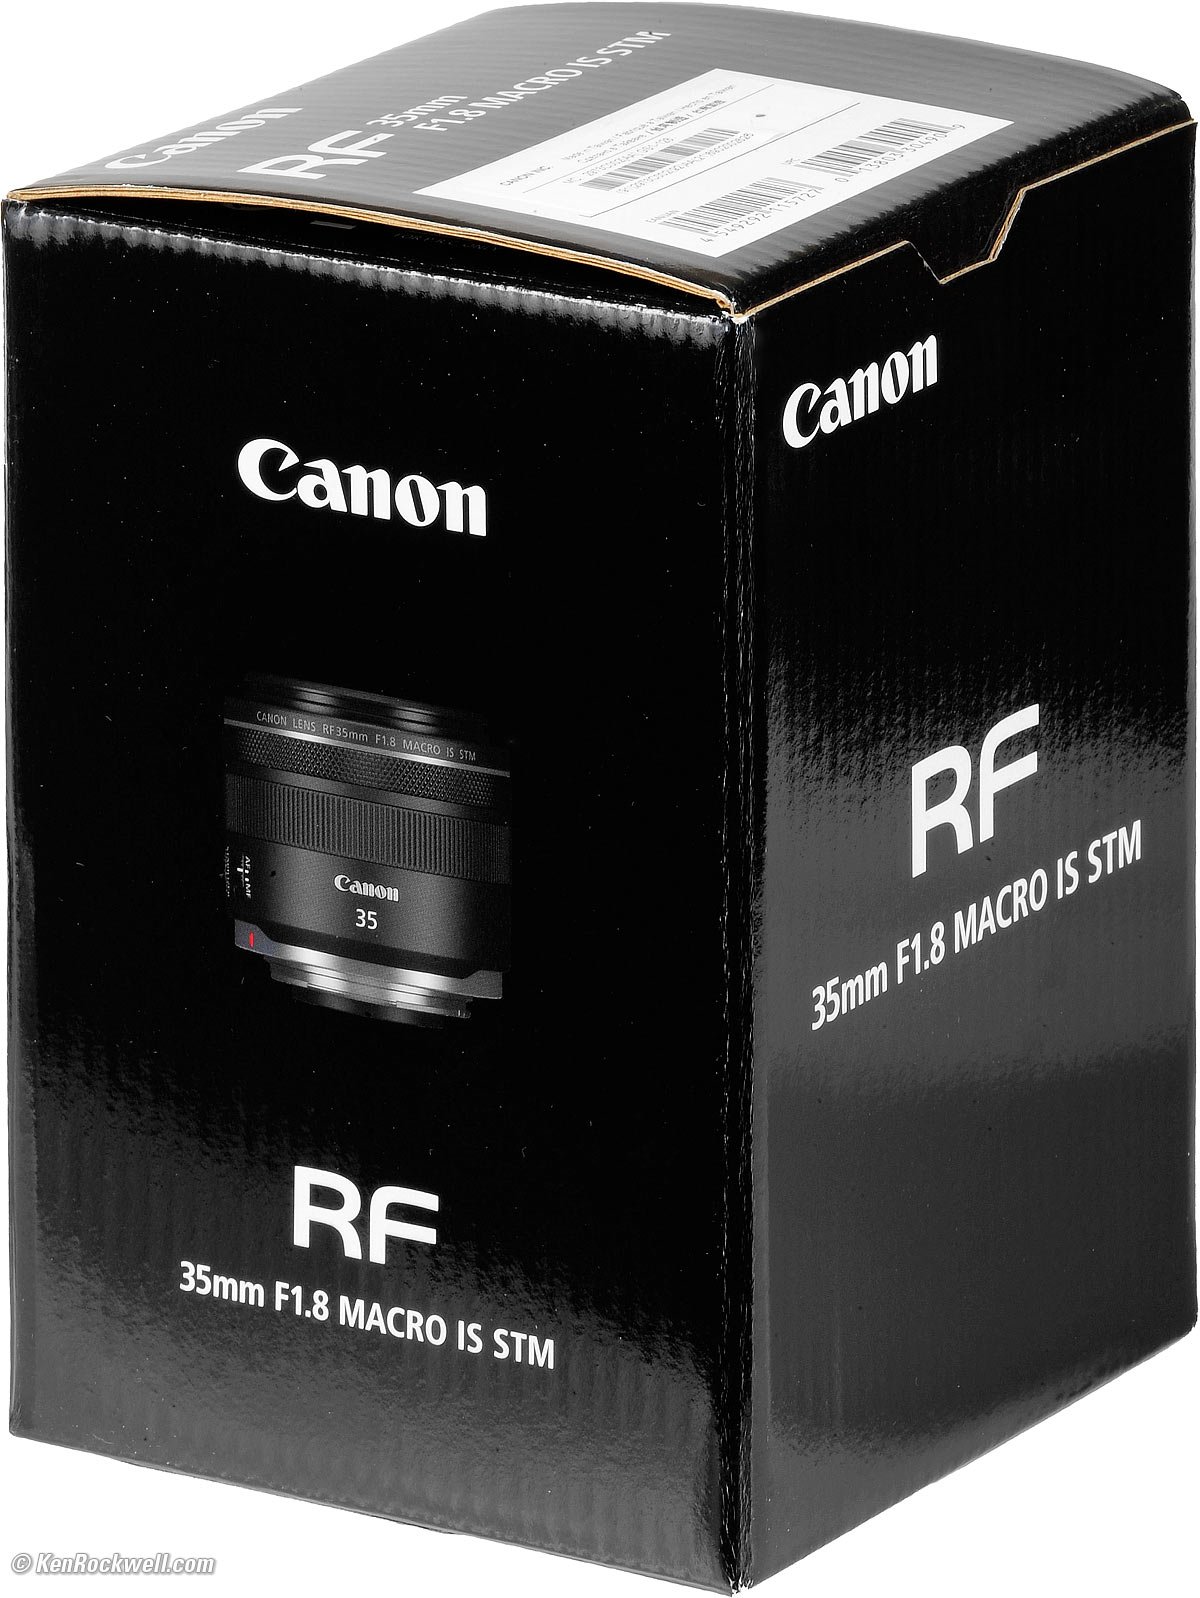 Canon RF 35mm f/1.8 Macro Review